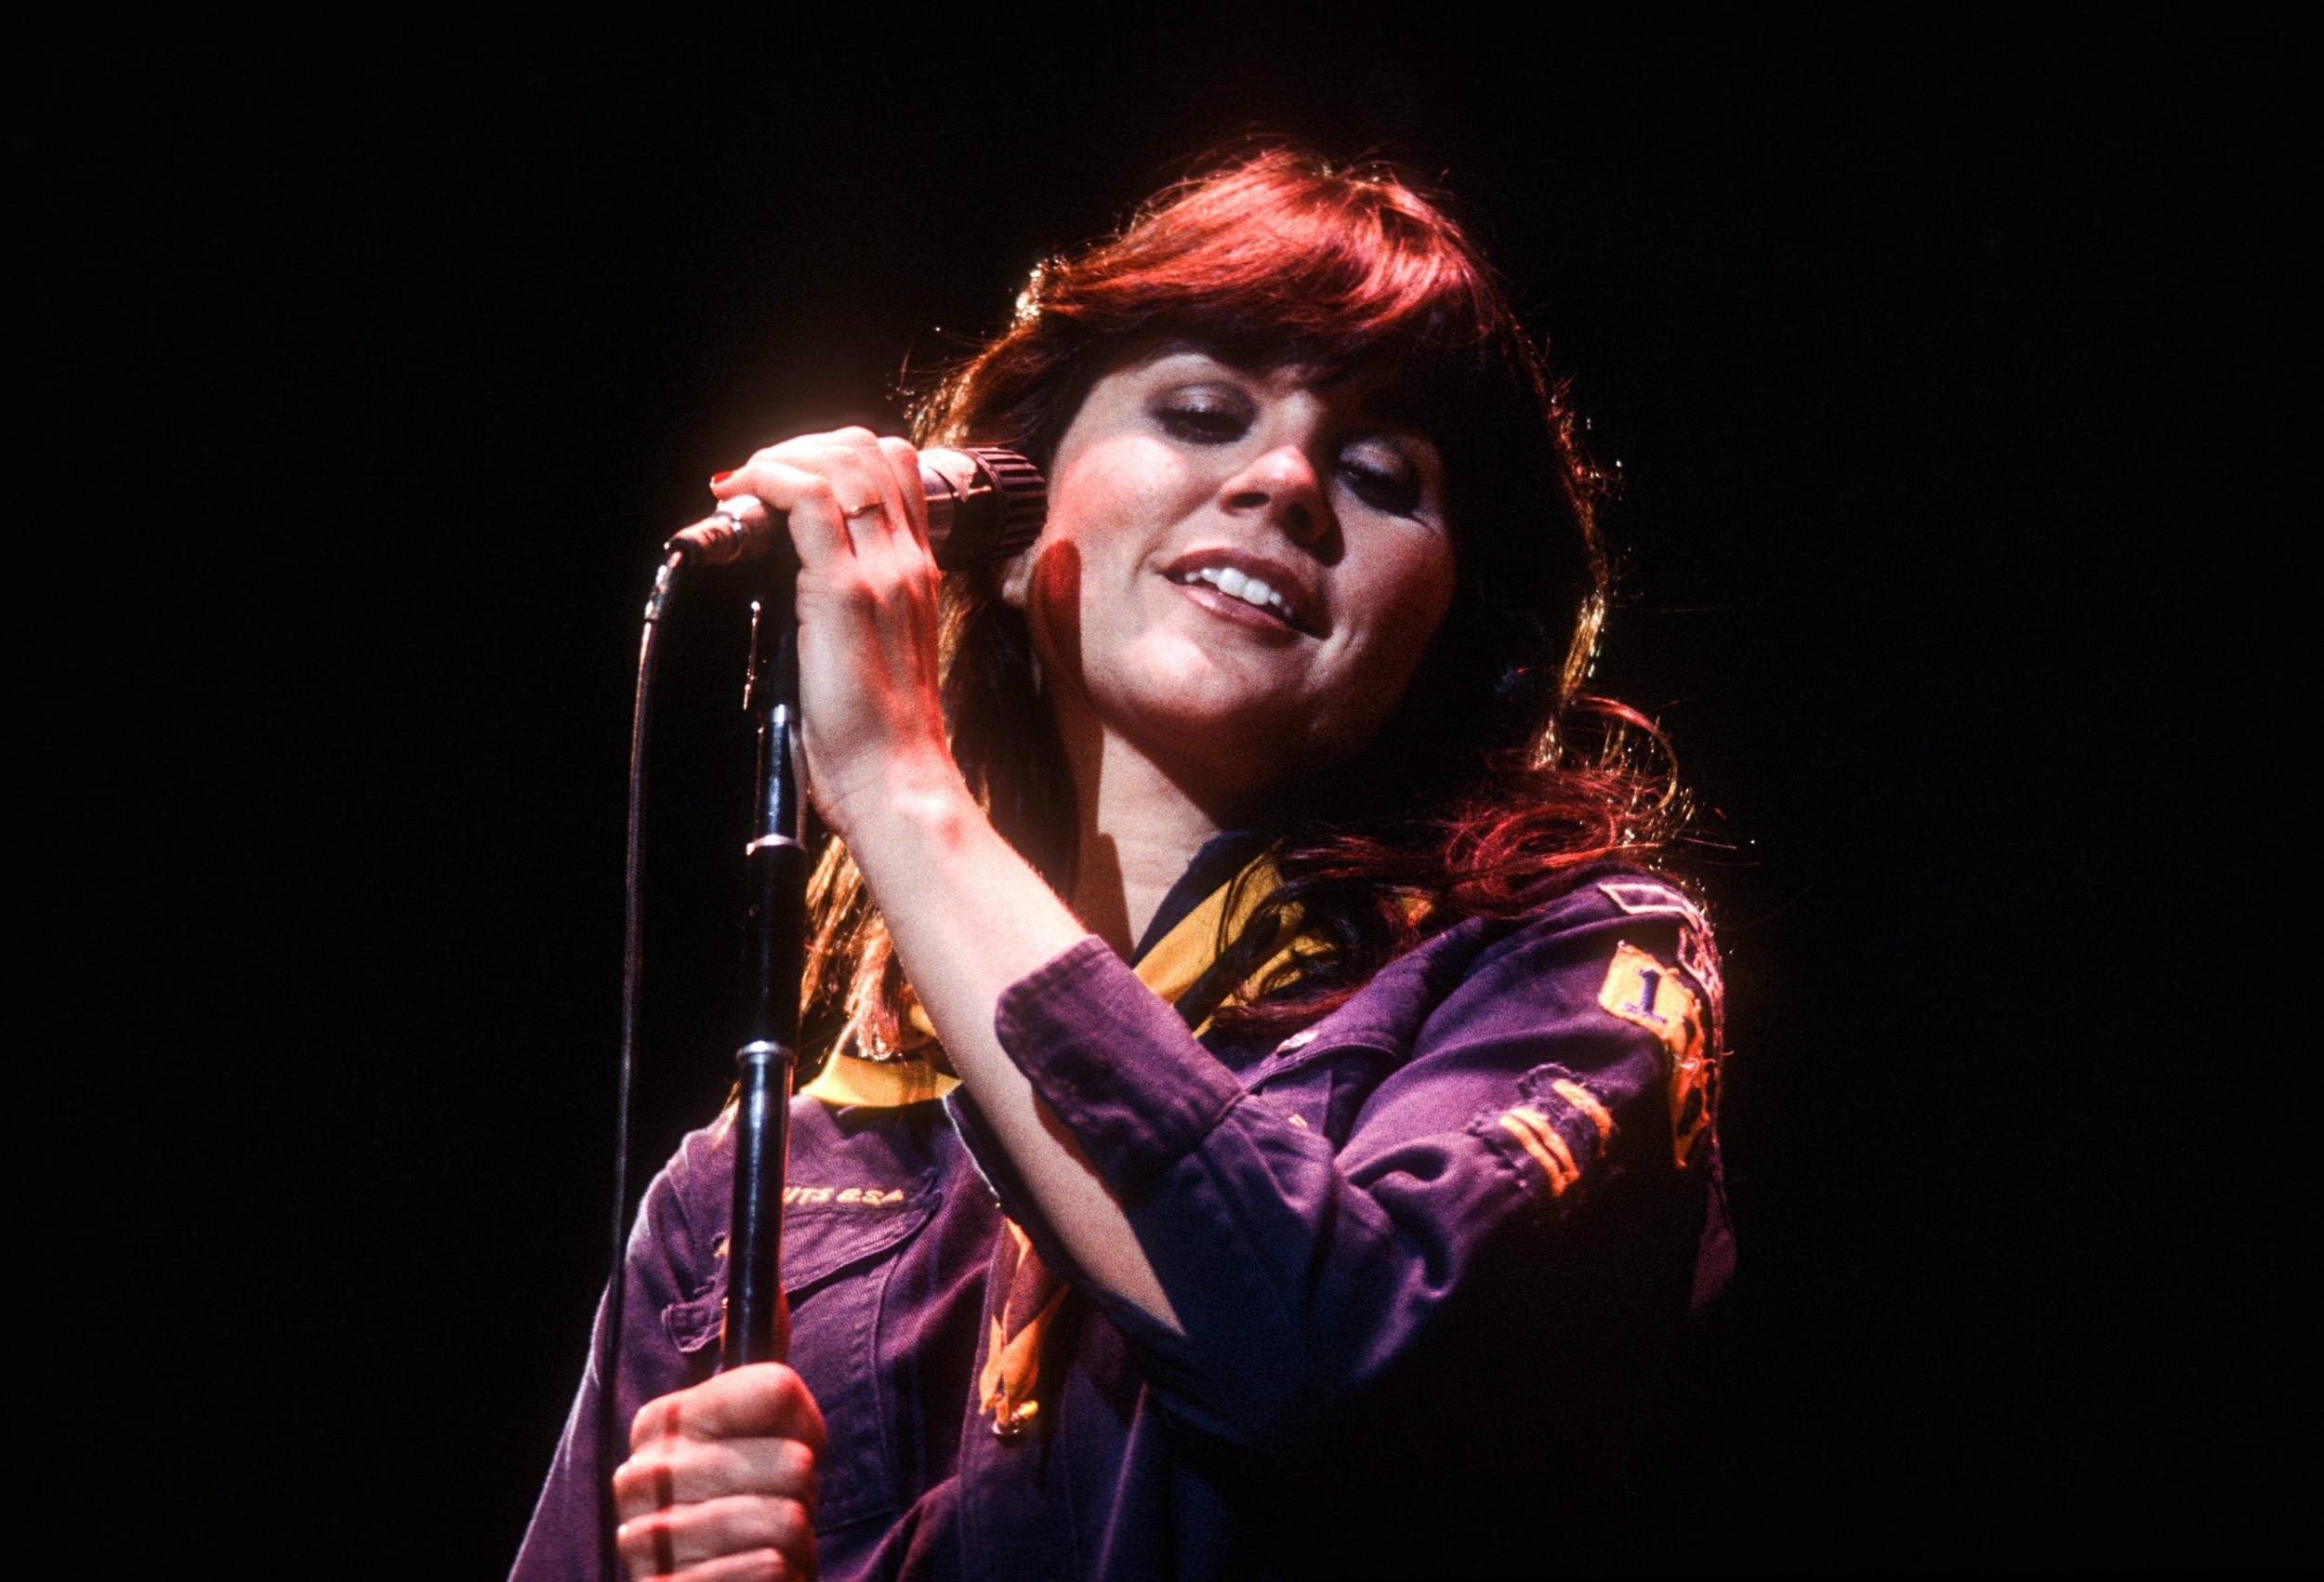 <p>Whether for her solo hits like “Blue Bayou” or the Trio recordings alongside Emmylou Harris and Dolly Parton, there’s no denying Linda Ronstadt’s place in the history of country music. </p><p><a href='https://www.msn.com/en-us/community/channel/vid-cj9pqbr0vn9in2b6ddcd8sfgpfq6x6utp44fssrv6mc2gtybw0us'>Follow us on MSN to see more of our exclusive entertainment content.</a></p>